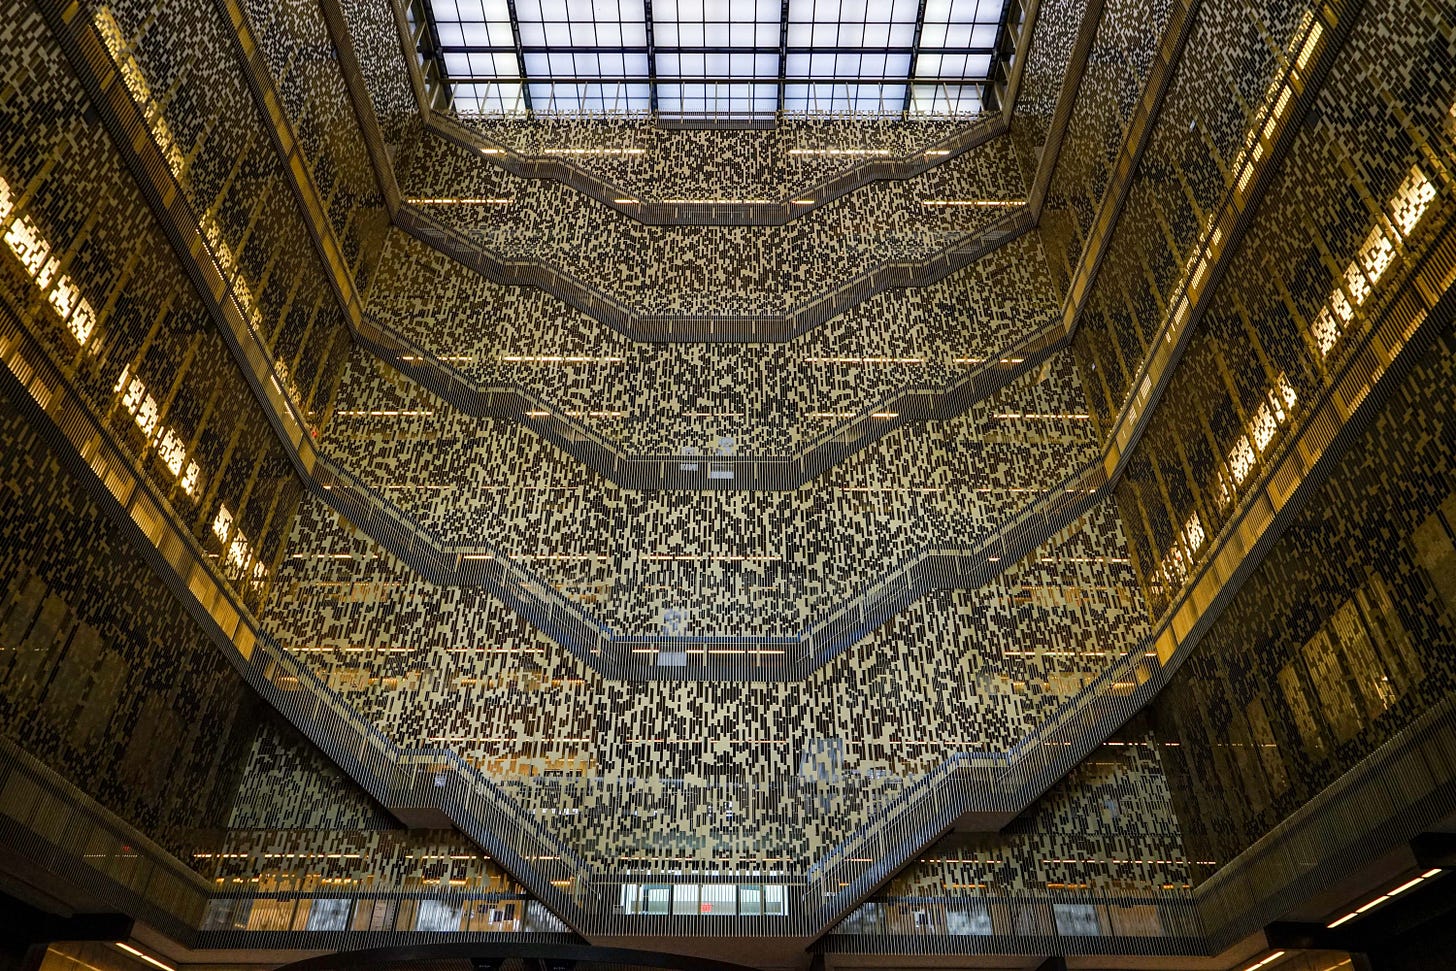 Photograph of staircases in NYU's Bobst Library